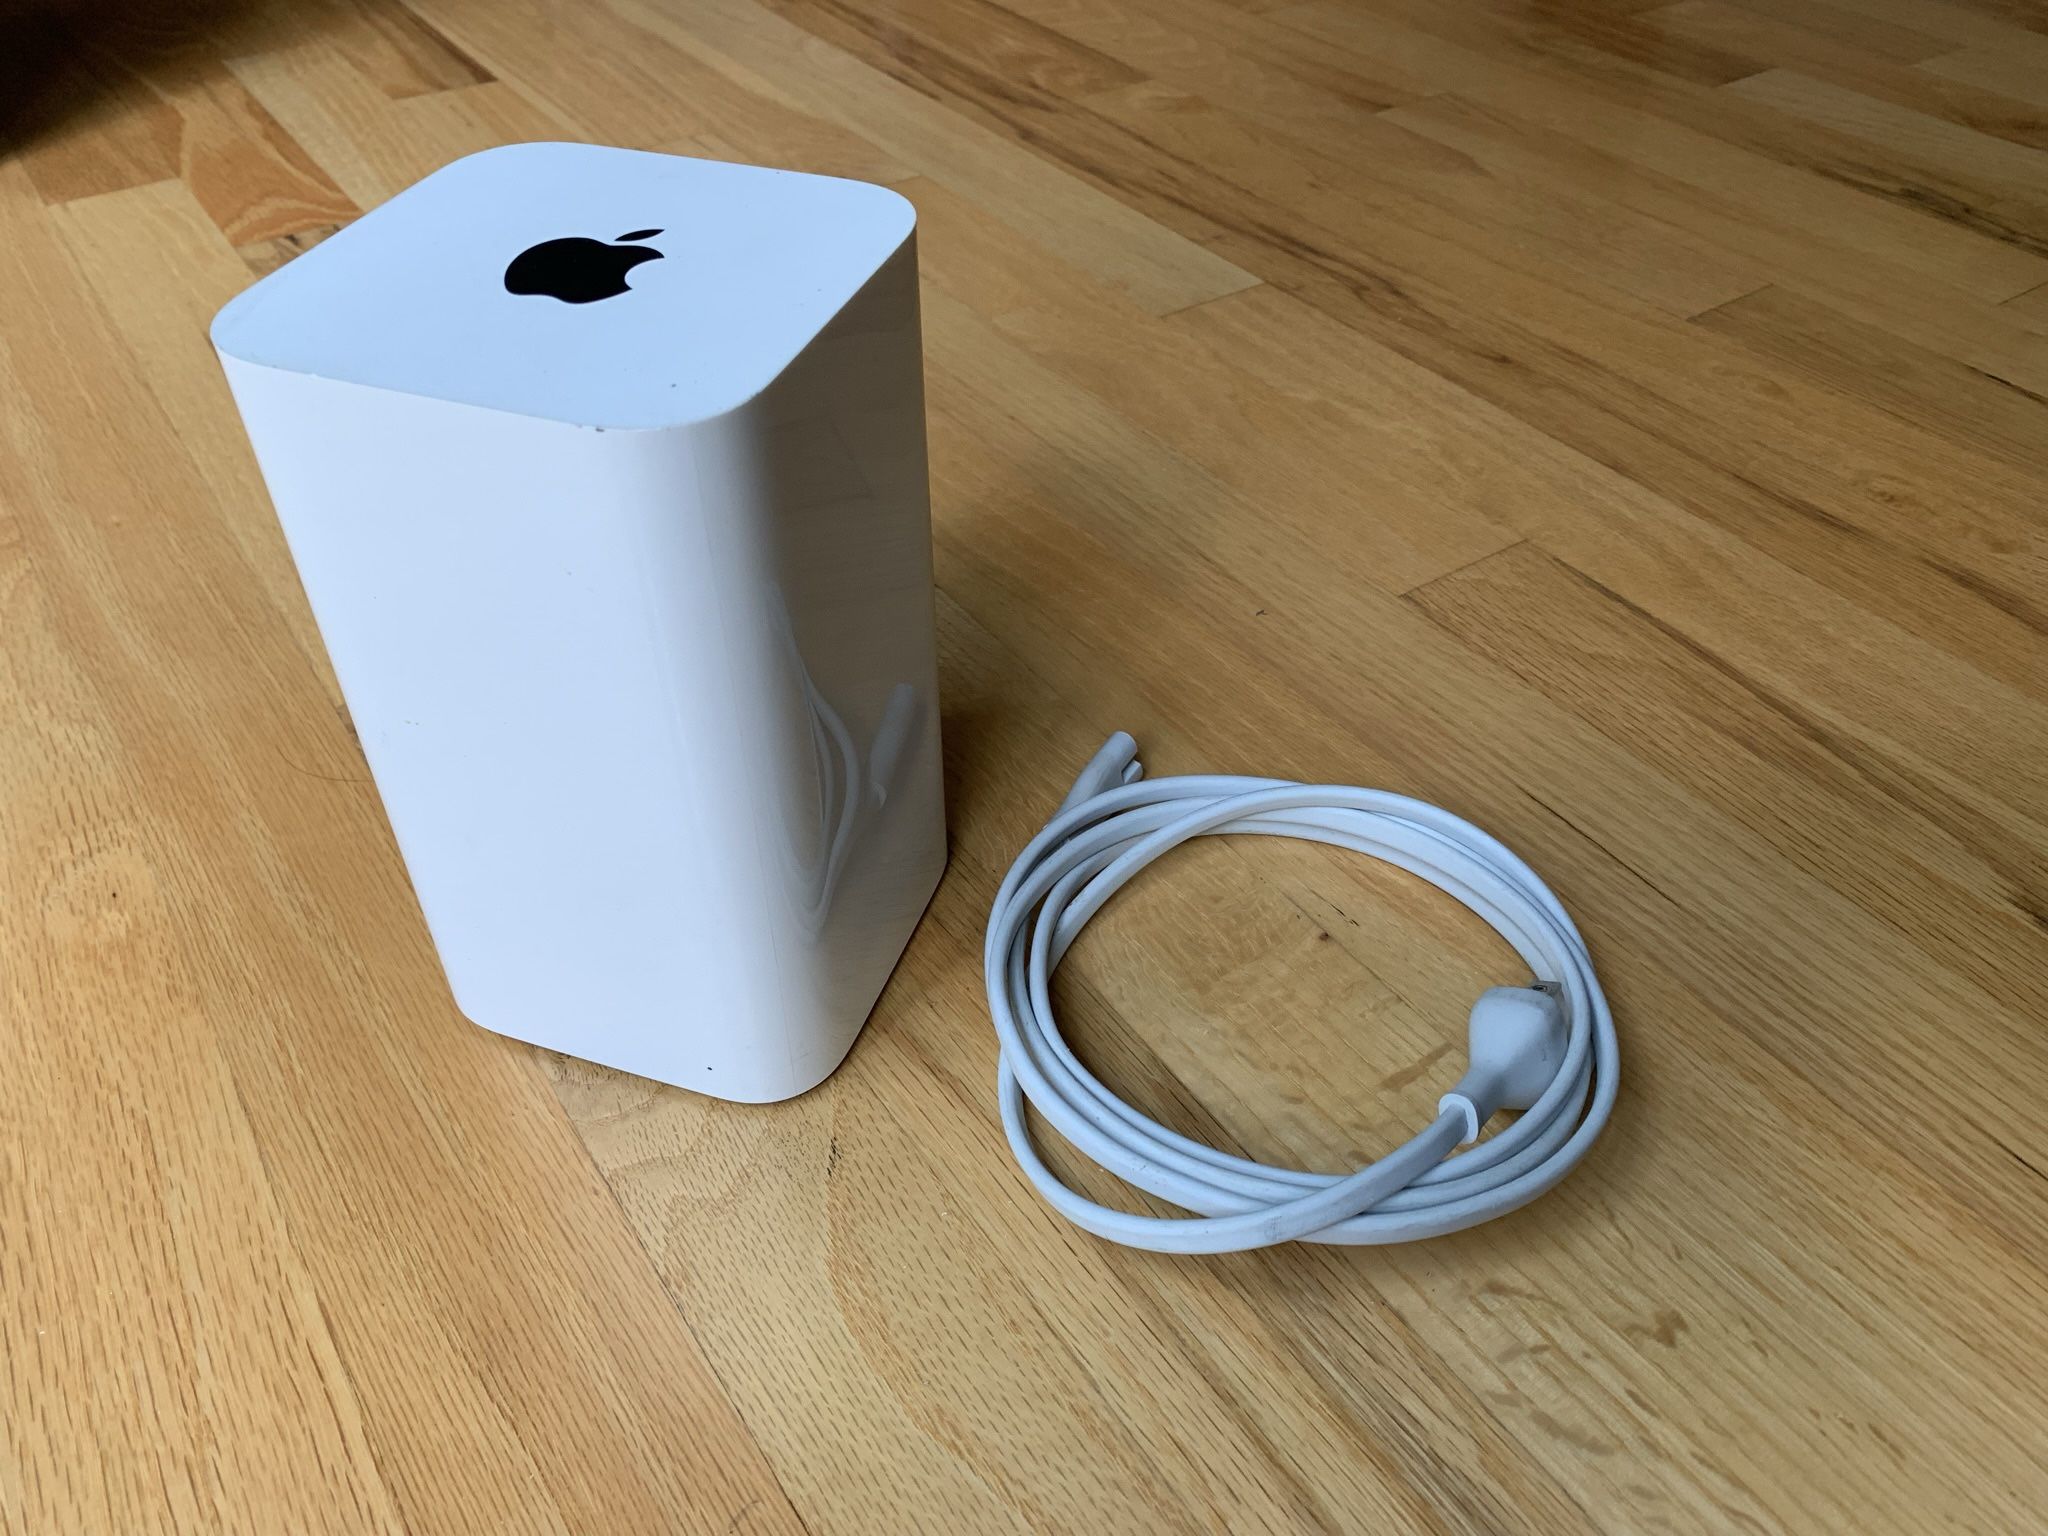  6th Gen Airport Extreme Dual Band AC Router